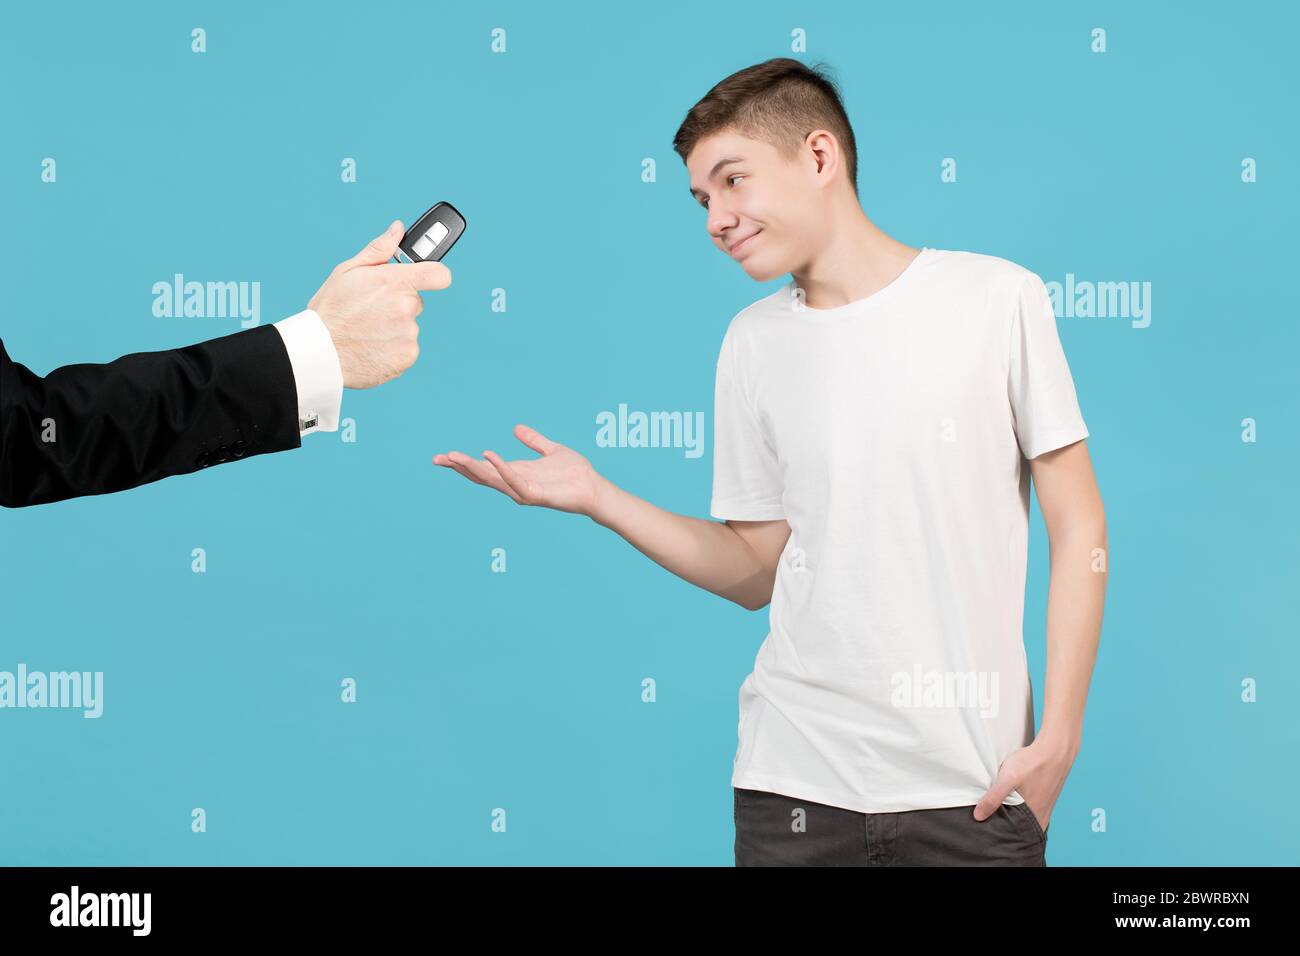 A teenager happily accepts a car key, which a man in a jacket holds out to him. Perhaps the father allows his son to drive a car. Isolated on blue Stock Photo